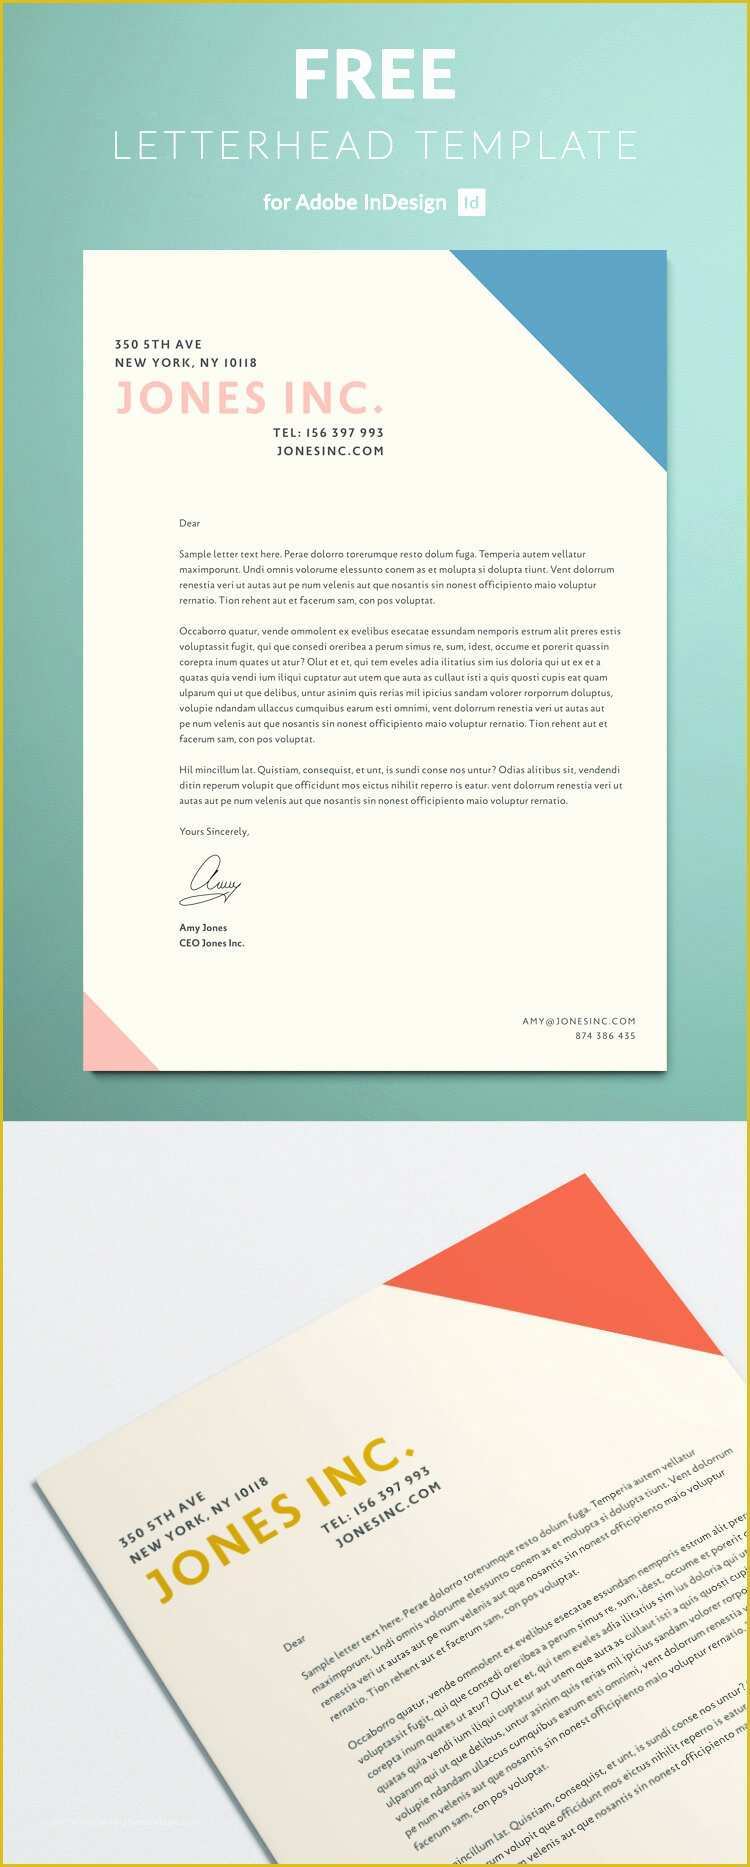 Adobe Indesign Templates Free Of Letterhead Template for Indesign